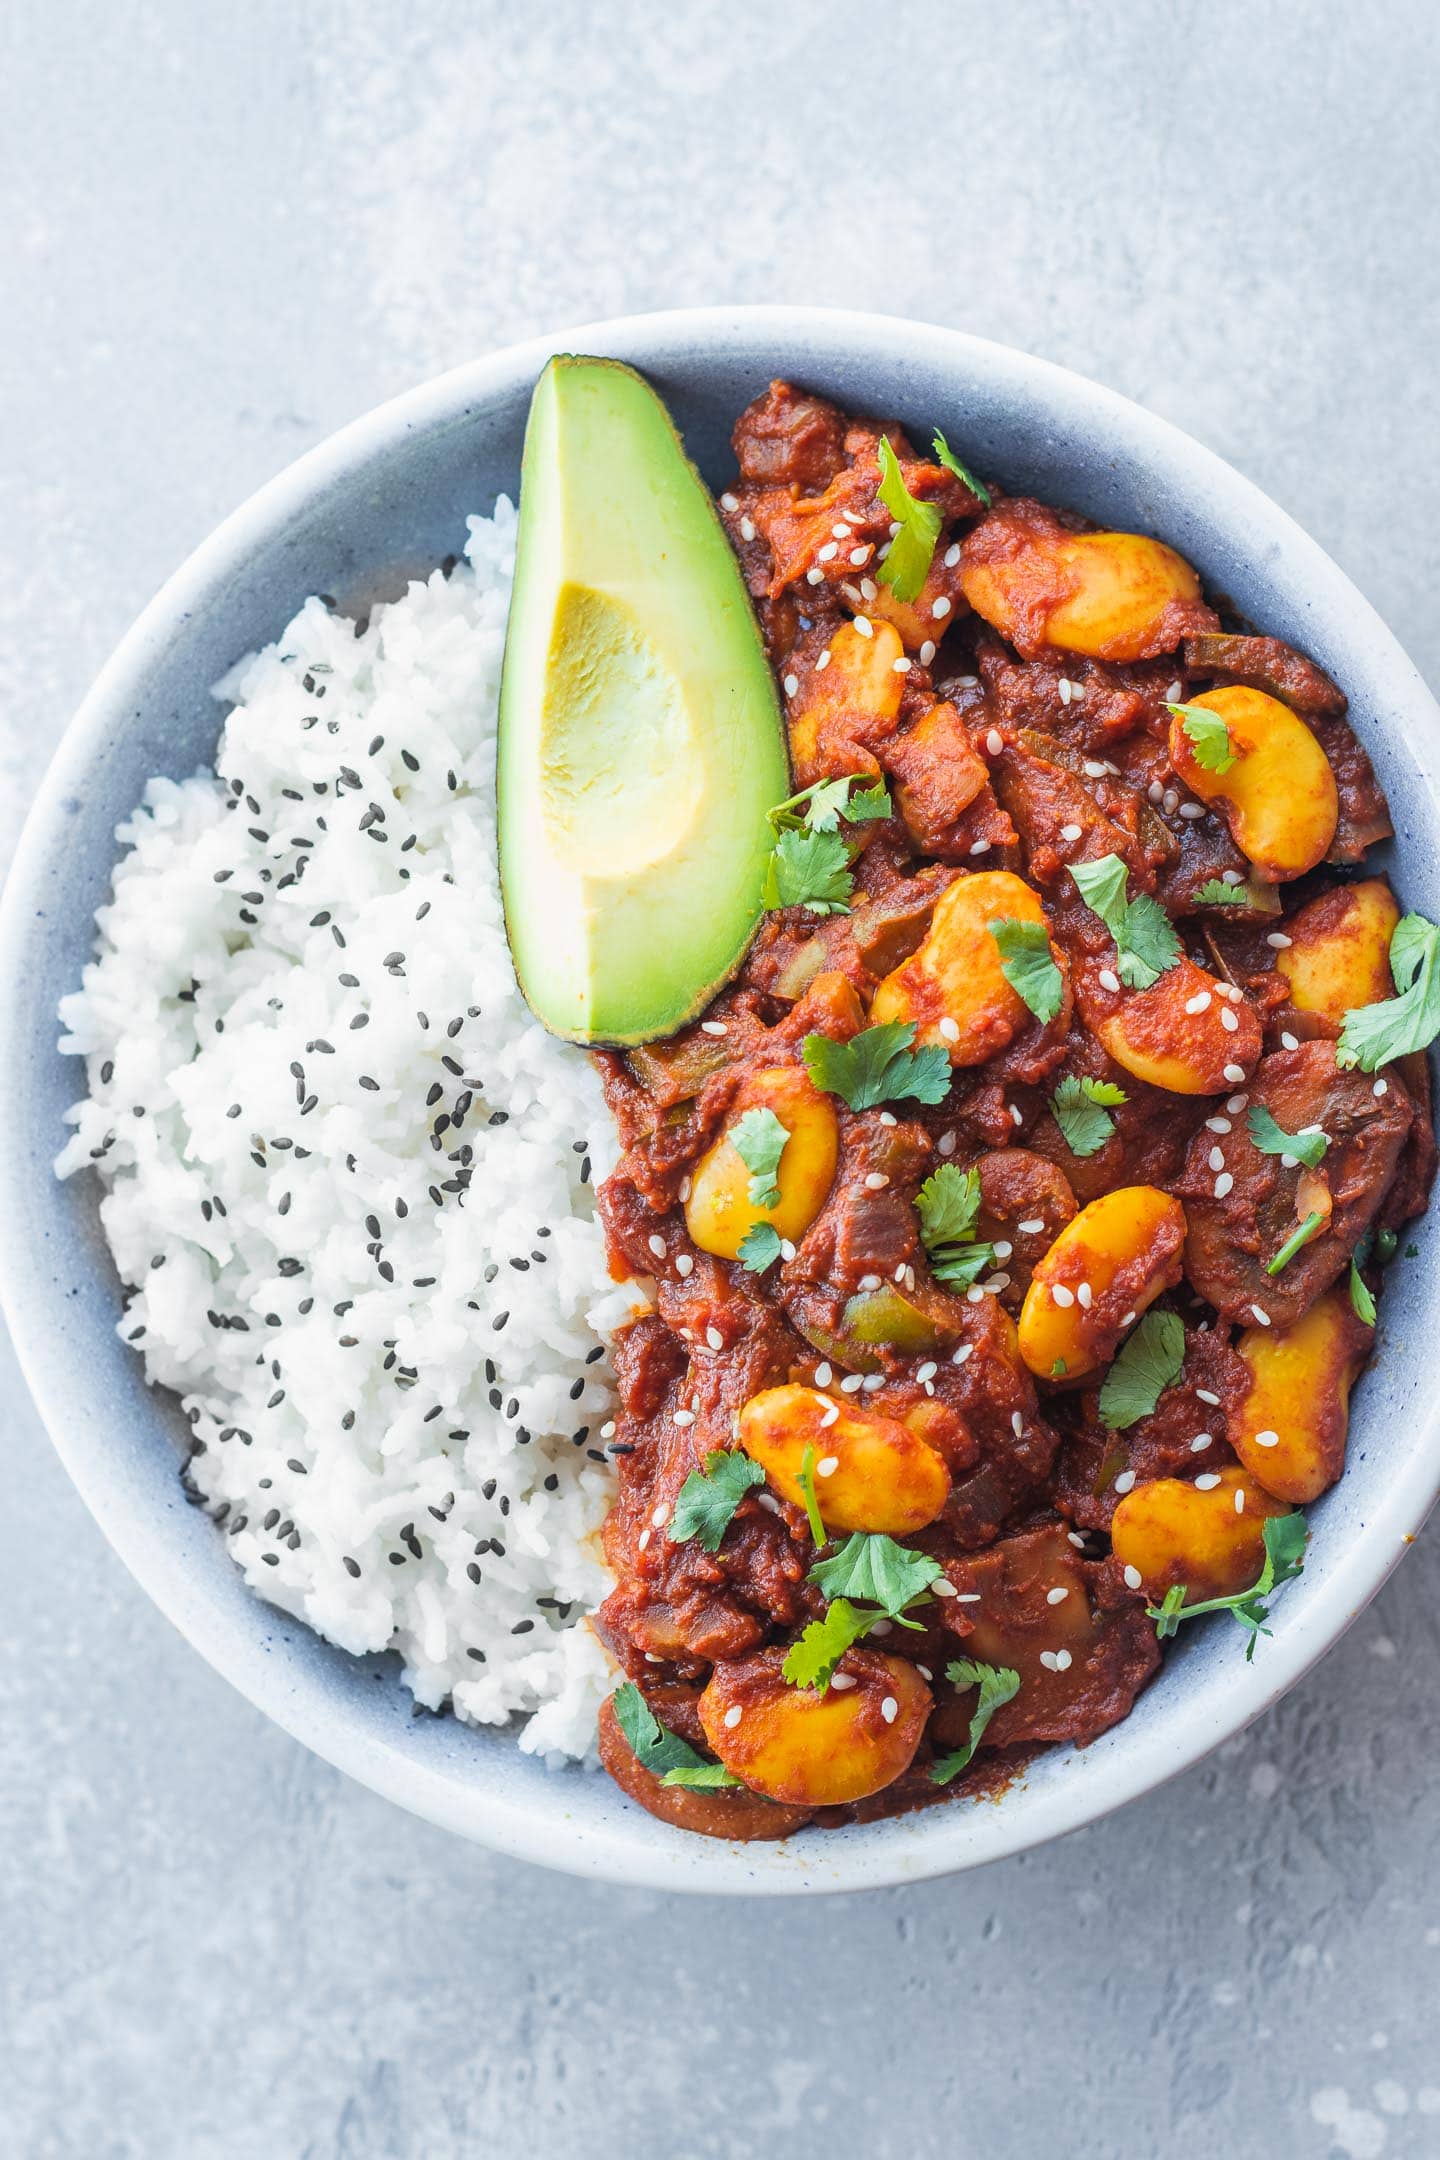 Vegan chili recipe with butter beans gluten-free